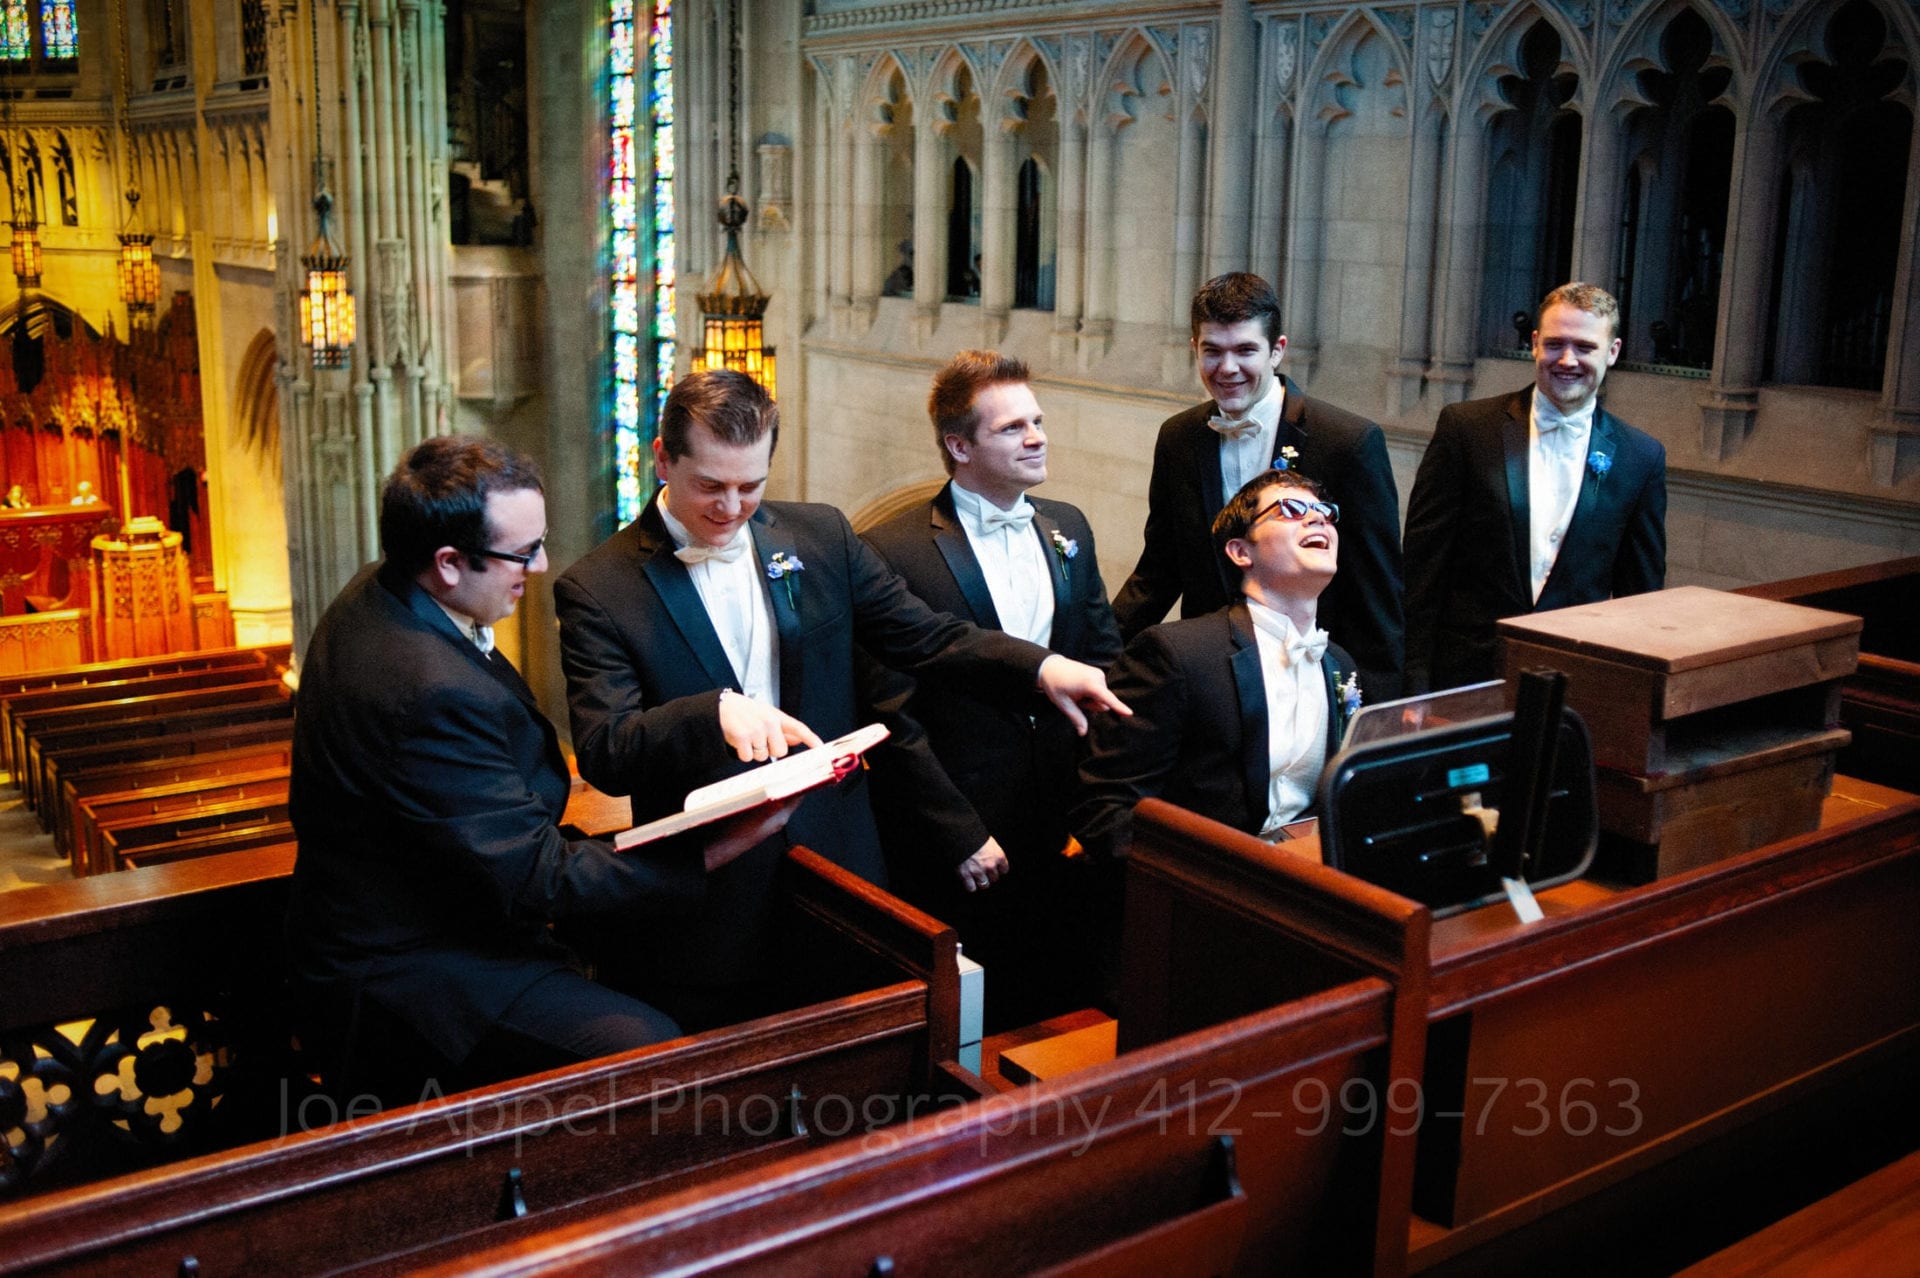 A groom wears sunglasses as he pretends to play the organ in the loft at Heinz memorial chapel while surrounded by his groomsmen.